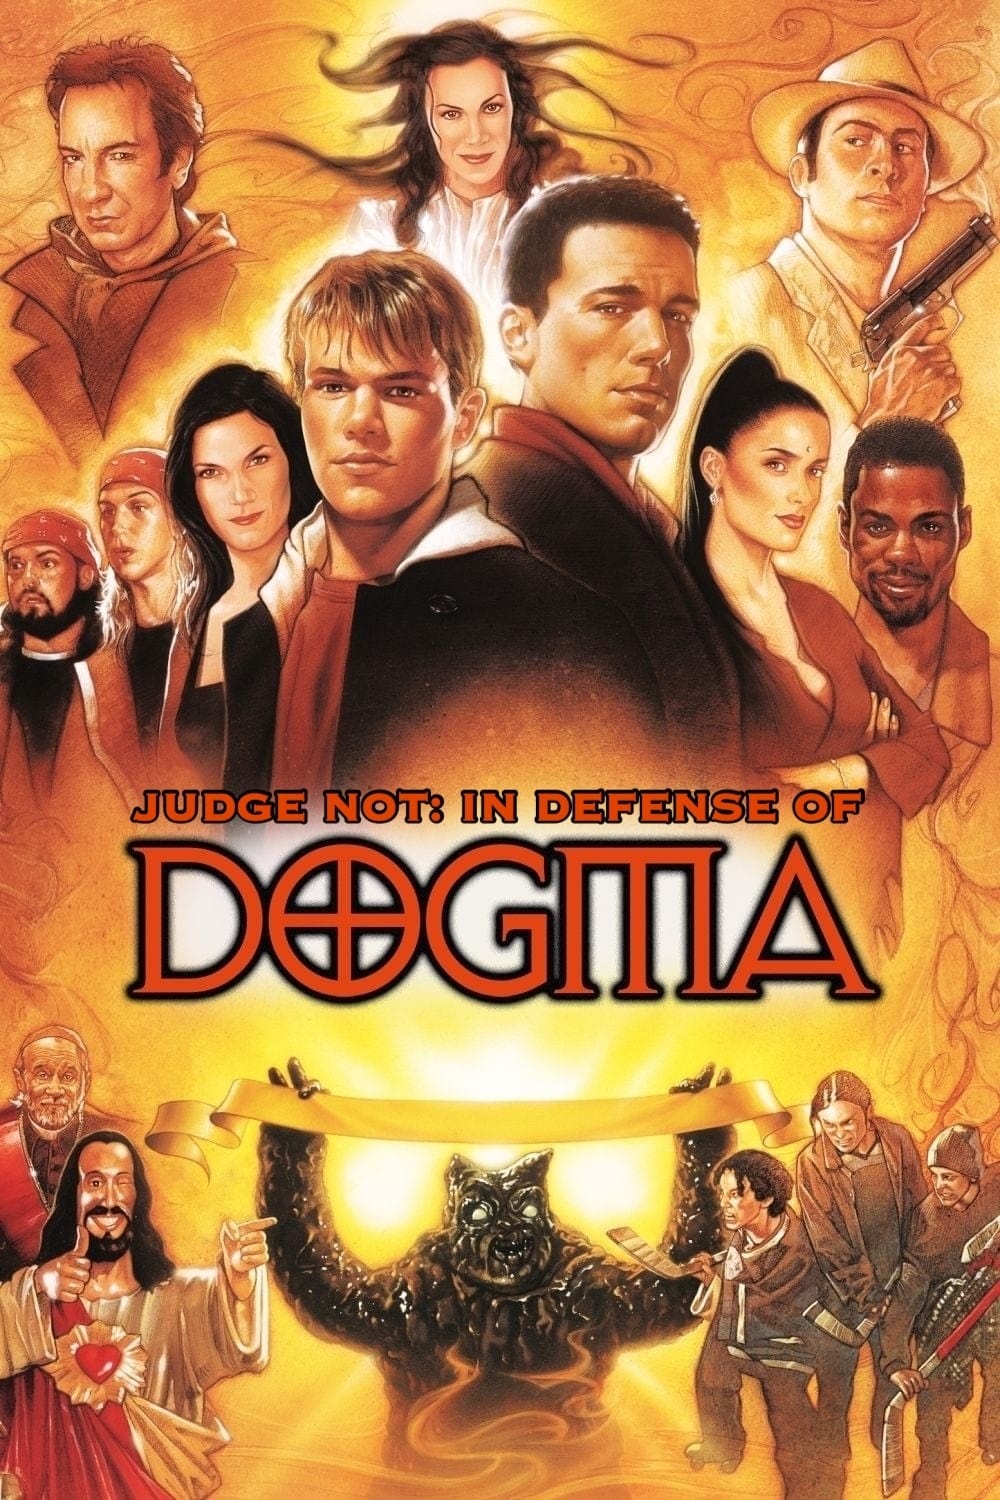 Judge Not: In Defense of Dogma (2001)